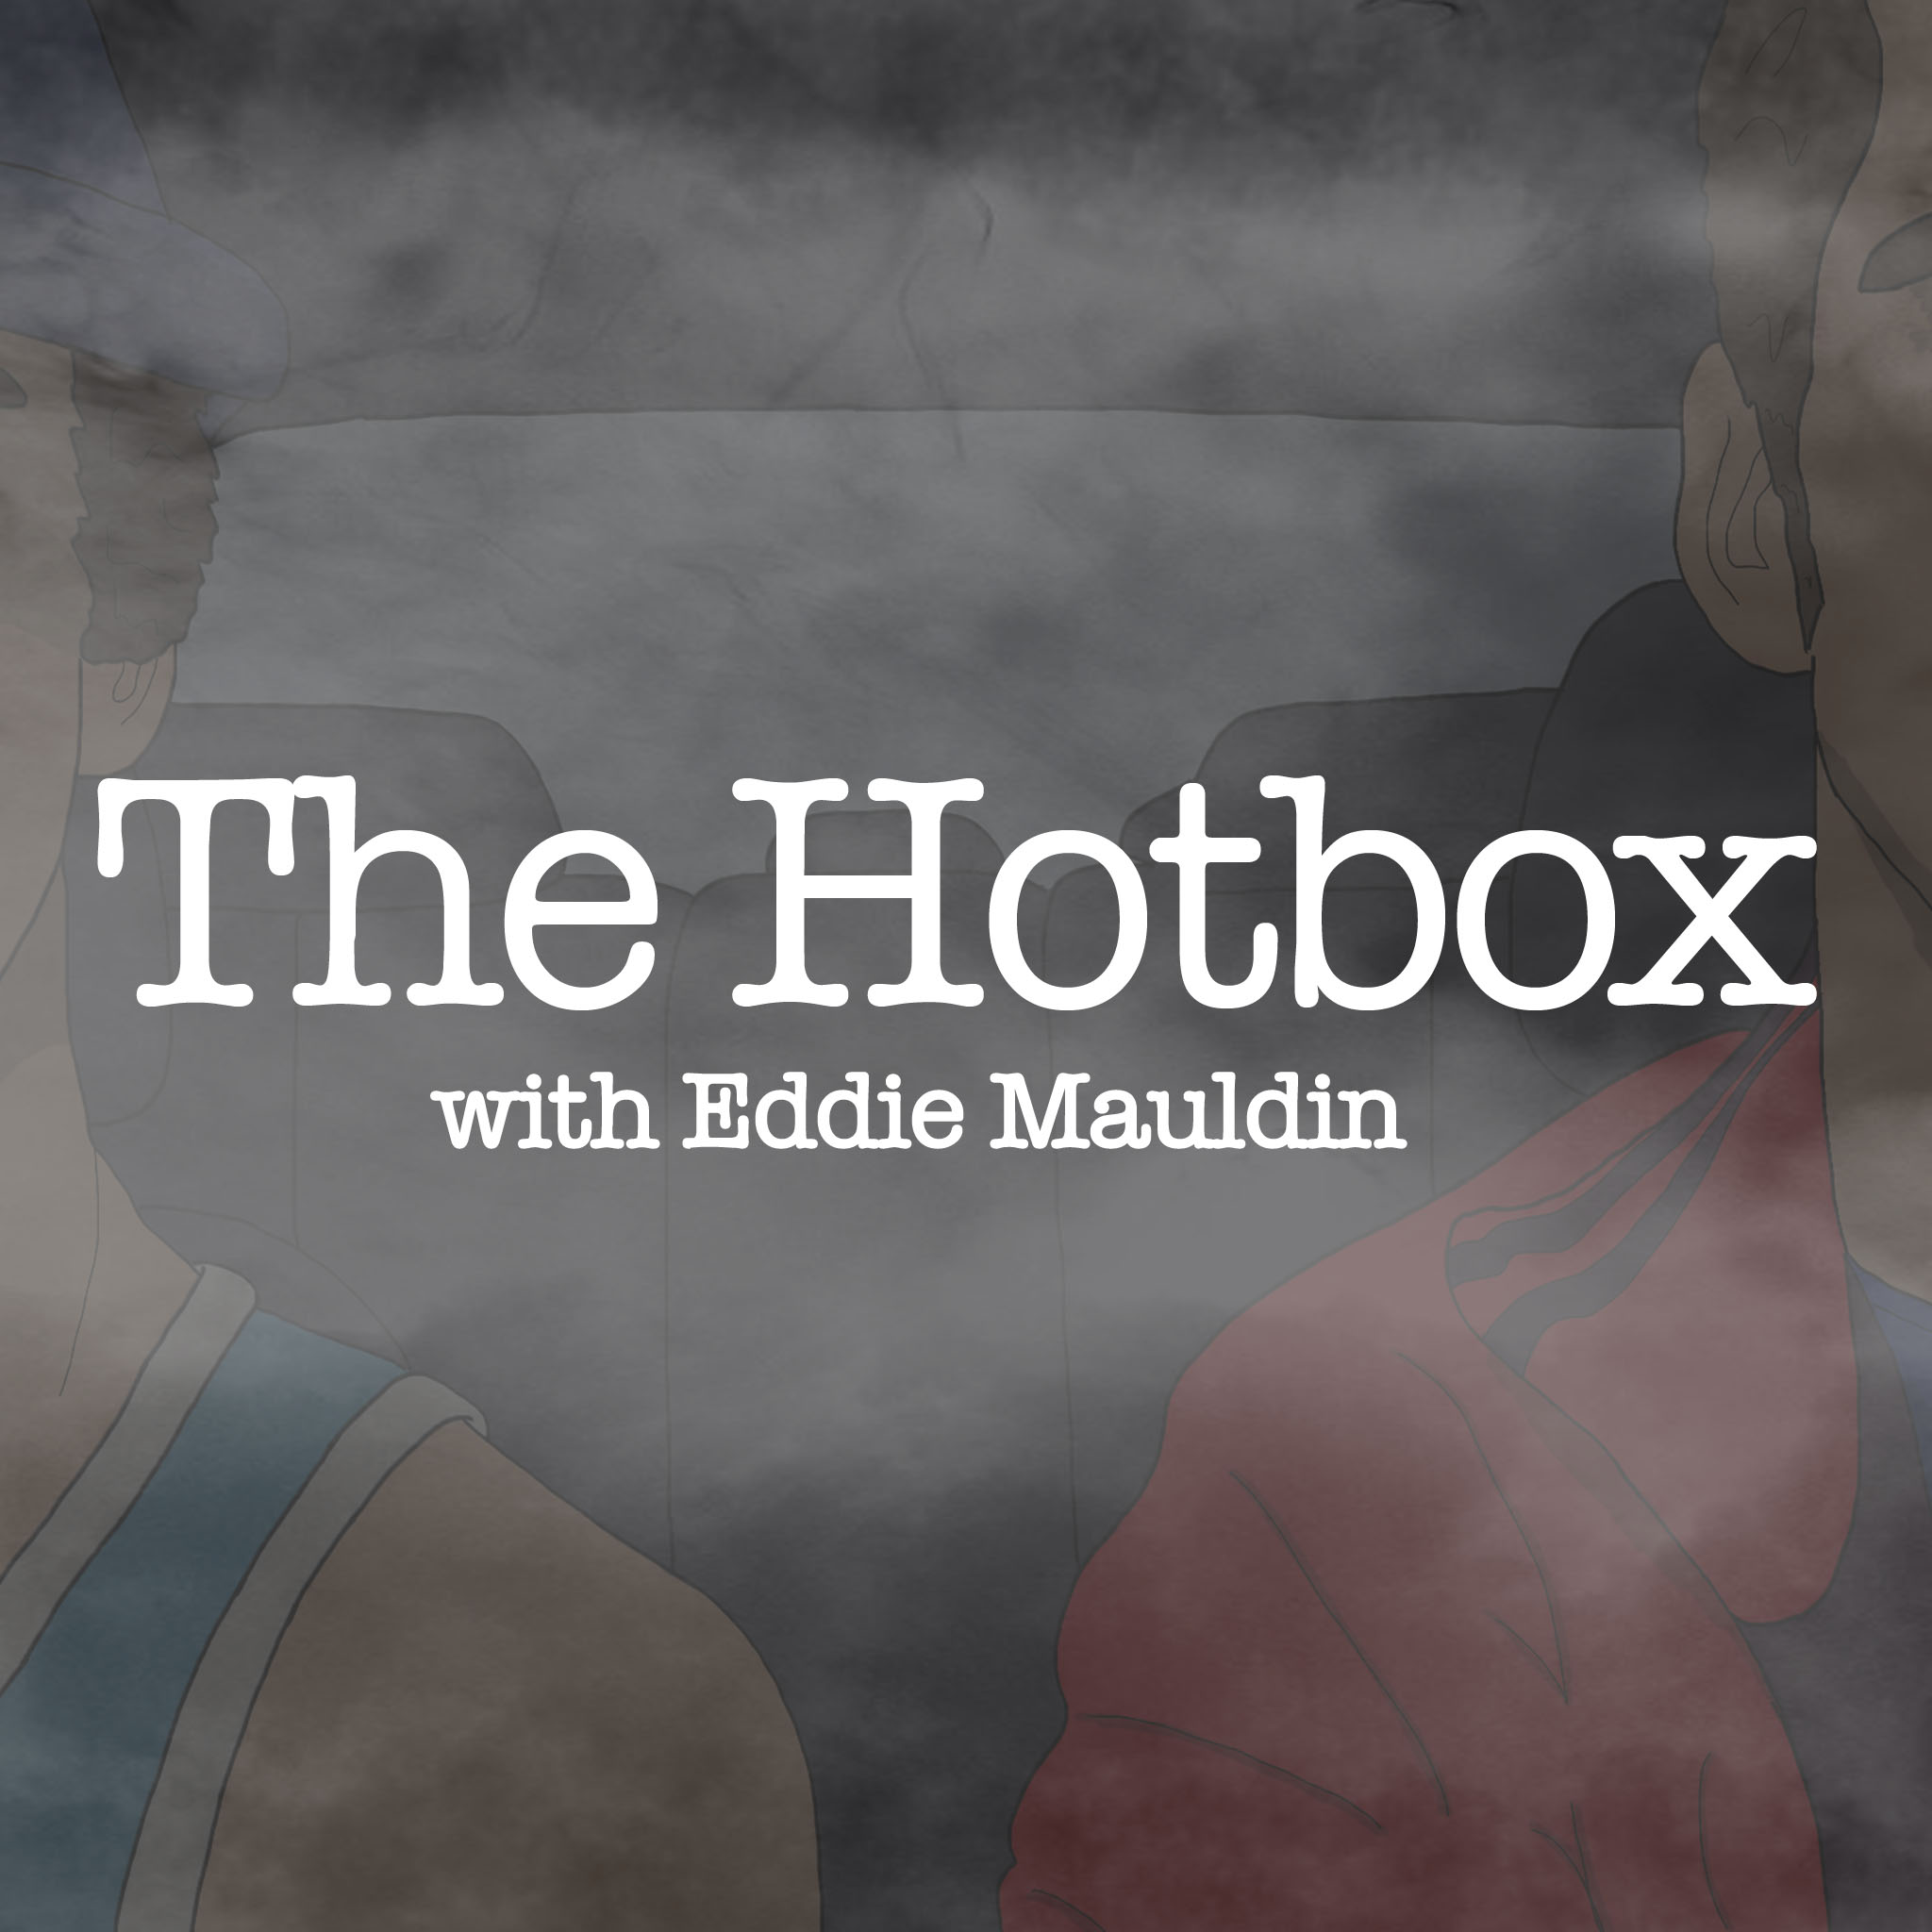 The Hotbox with Eddie Mauldin